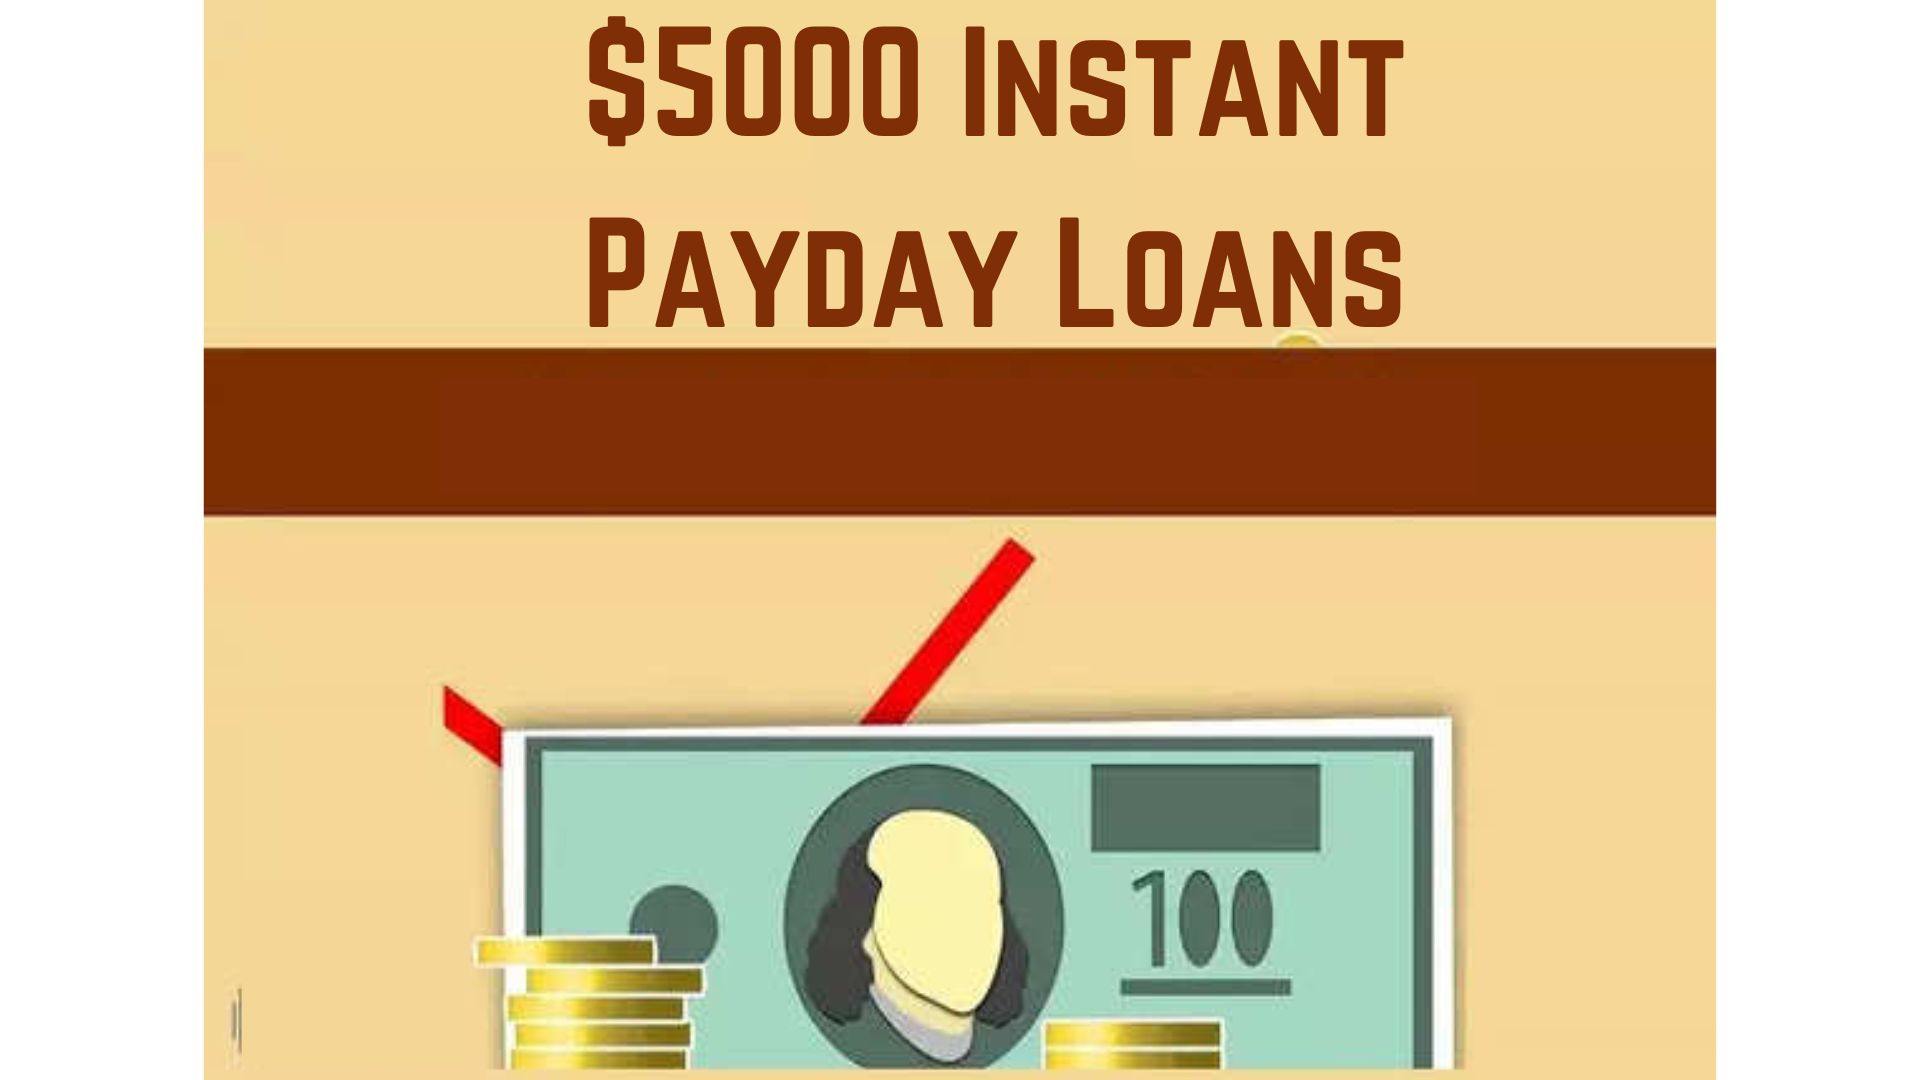 $5000 Instant Payday Loans